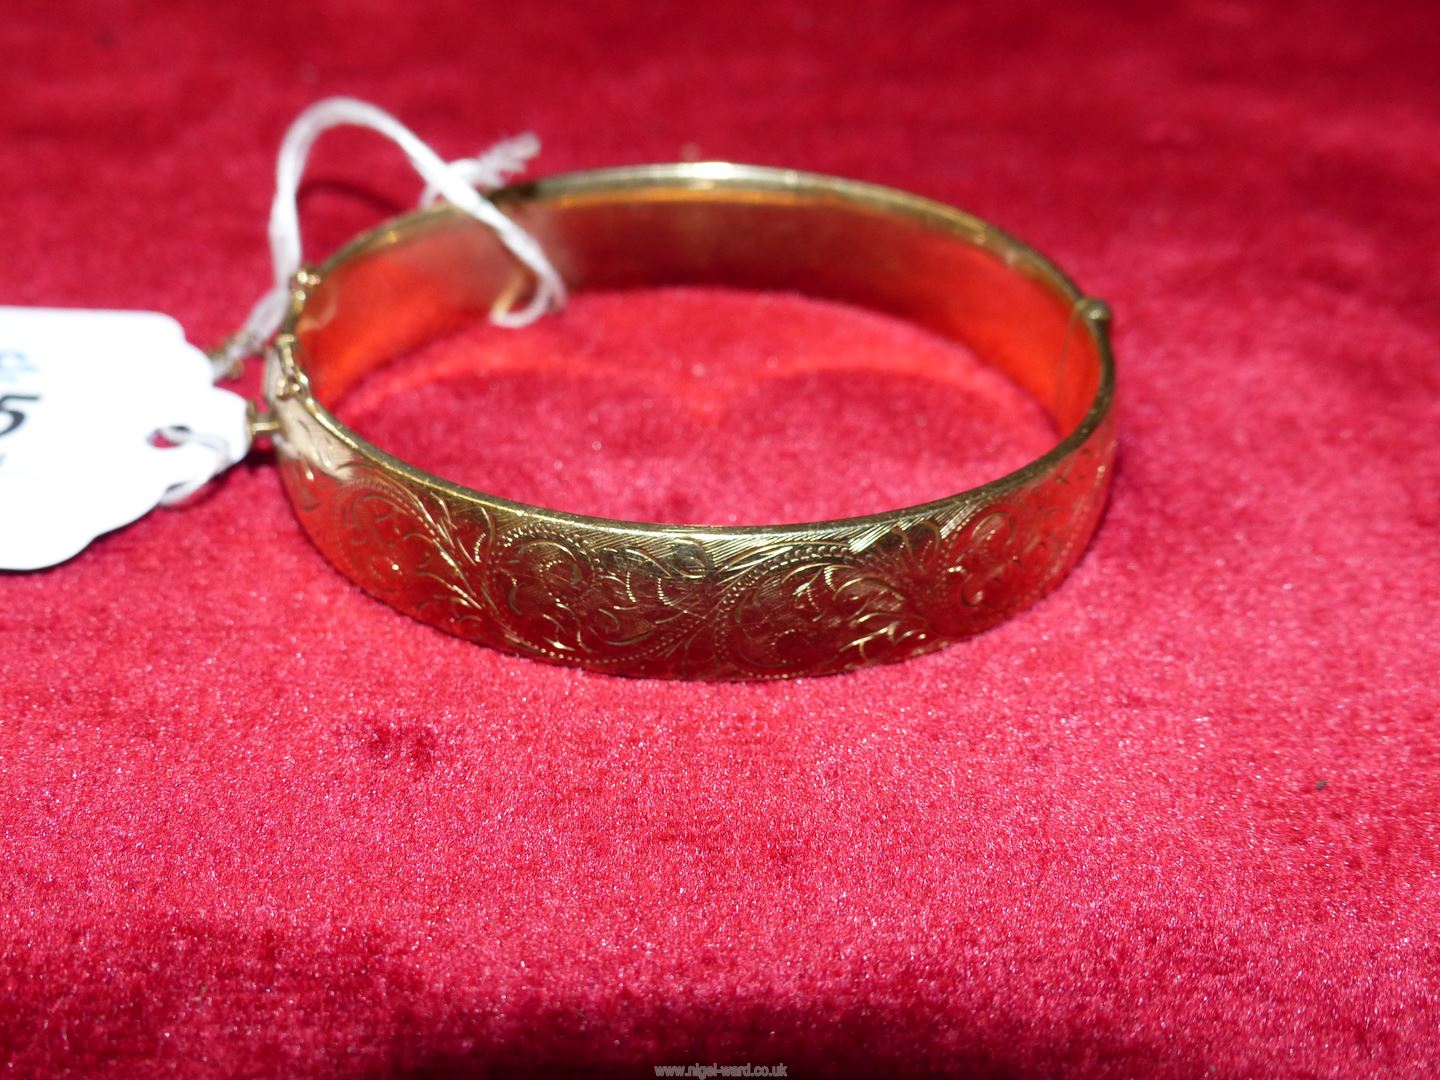 A plated 1/5th 9ct gold metal core Bangle with engraved foliate design. - Image 4 of 4